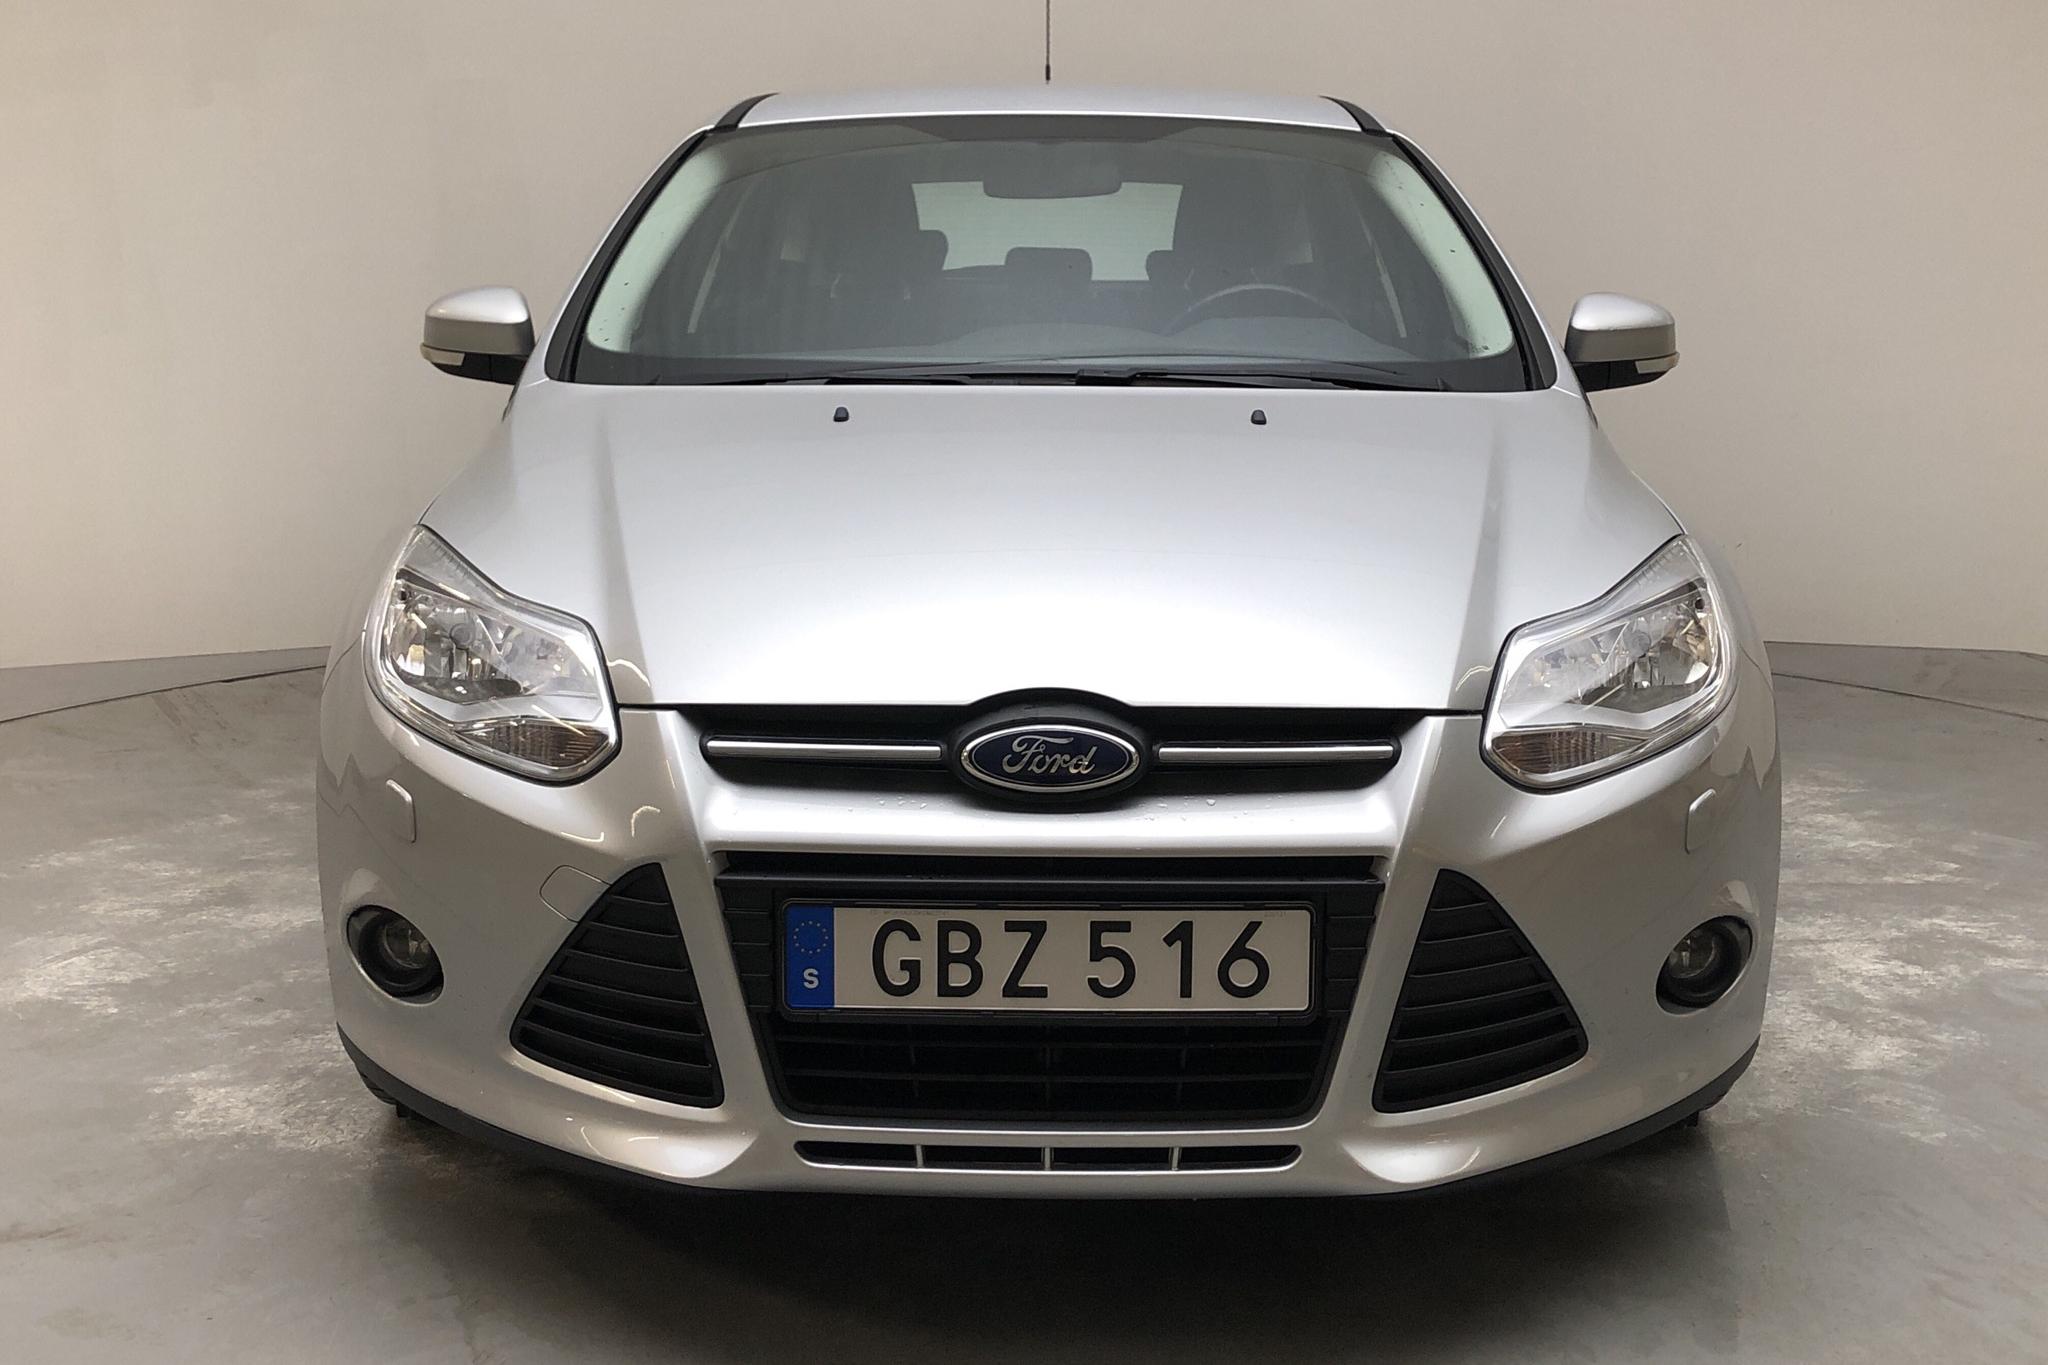 Ford Focus 1.0 EcoBoost 5dr (100hk) - 162 960 km - Manual - gray - 2013